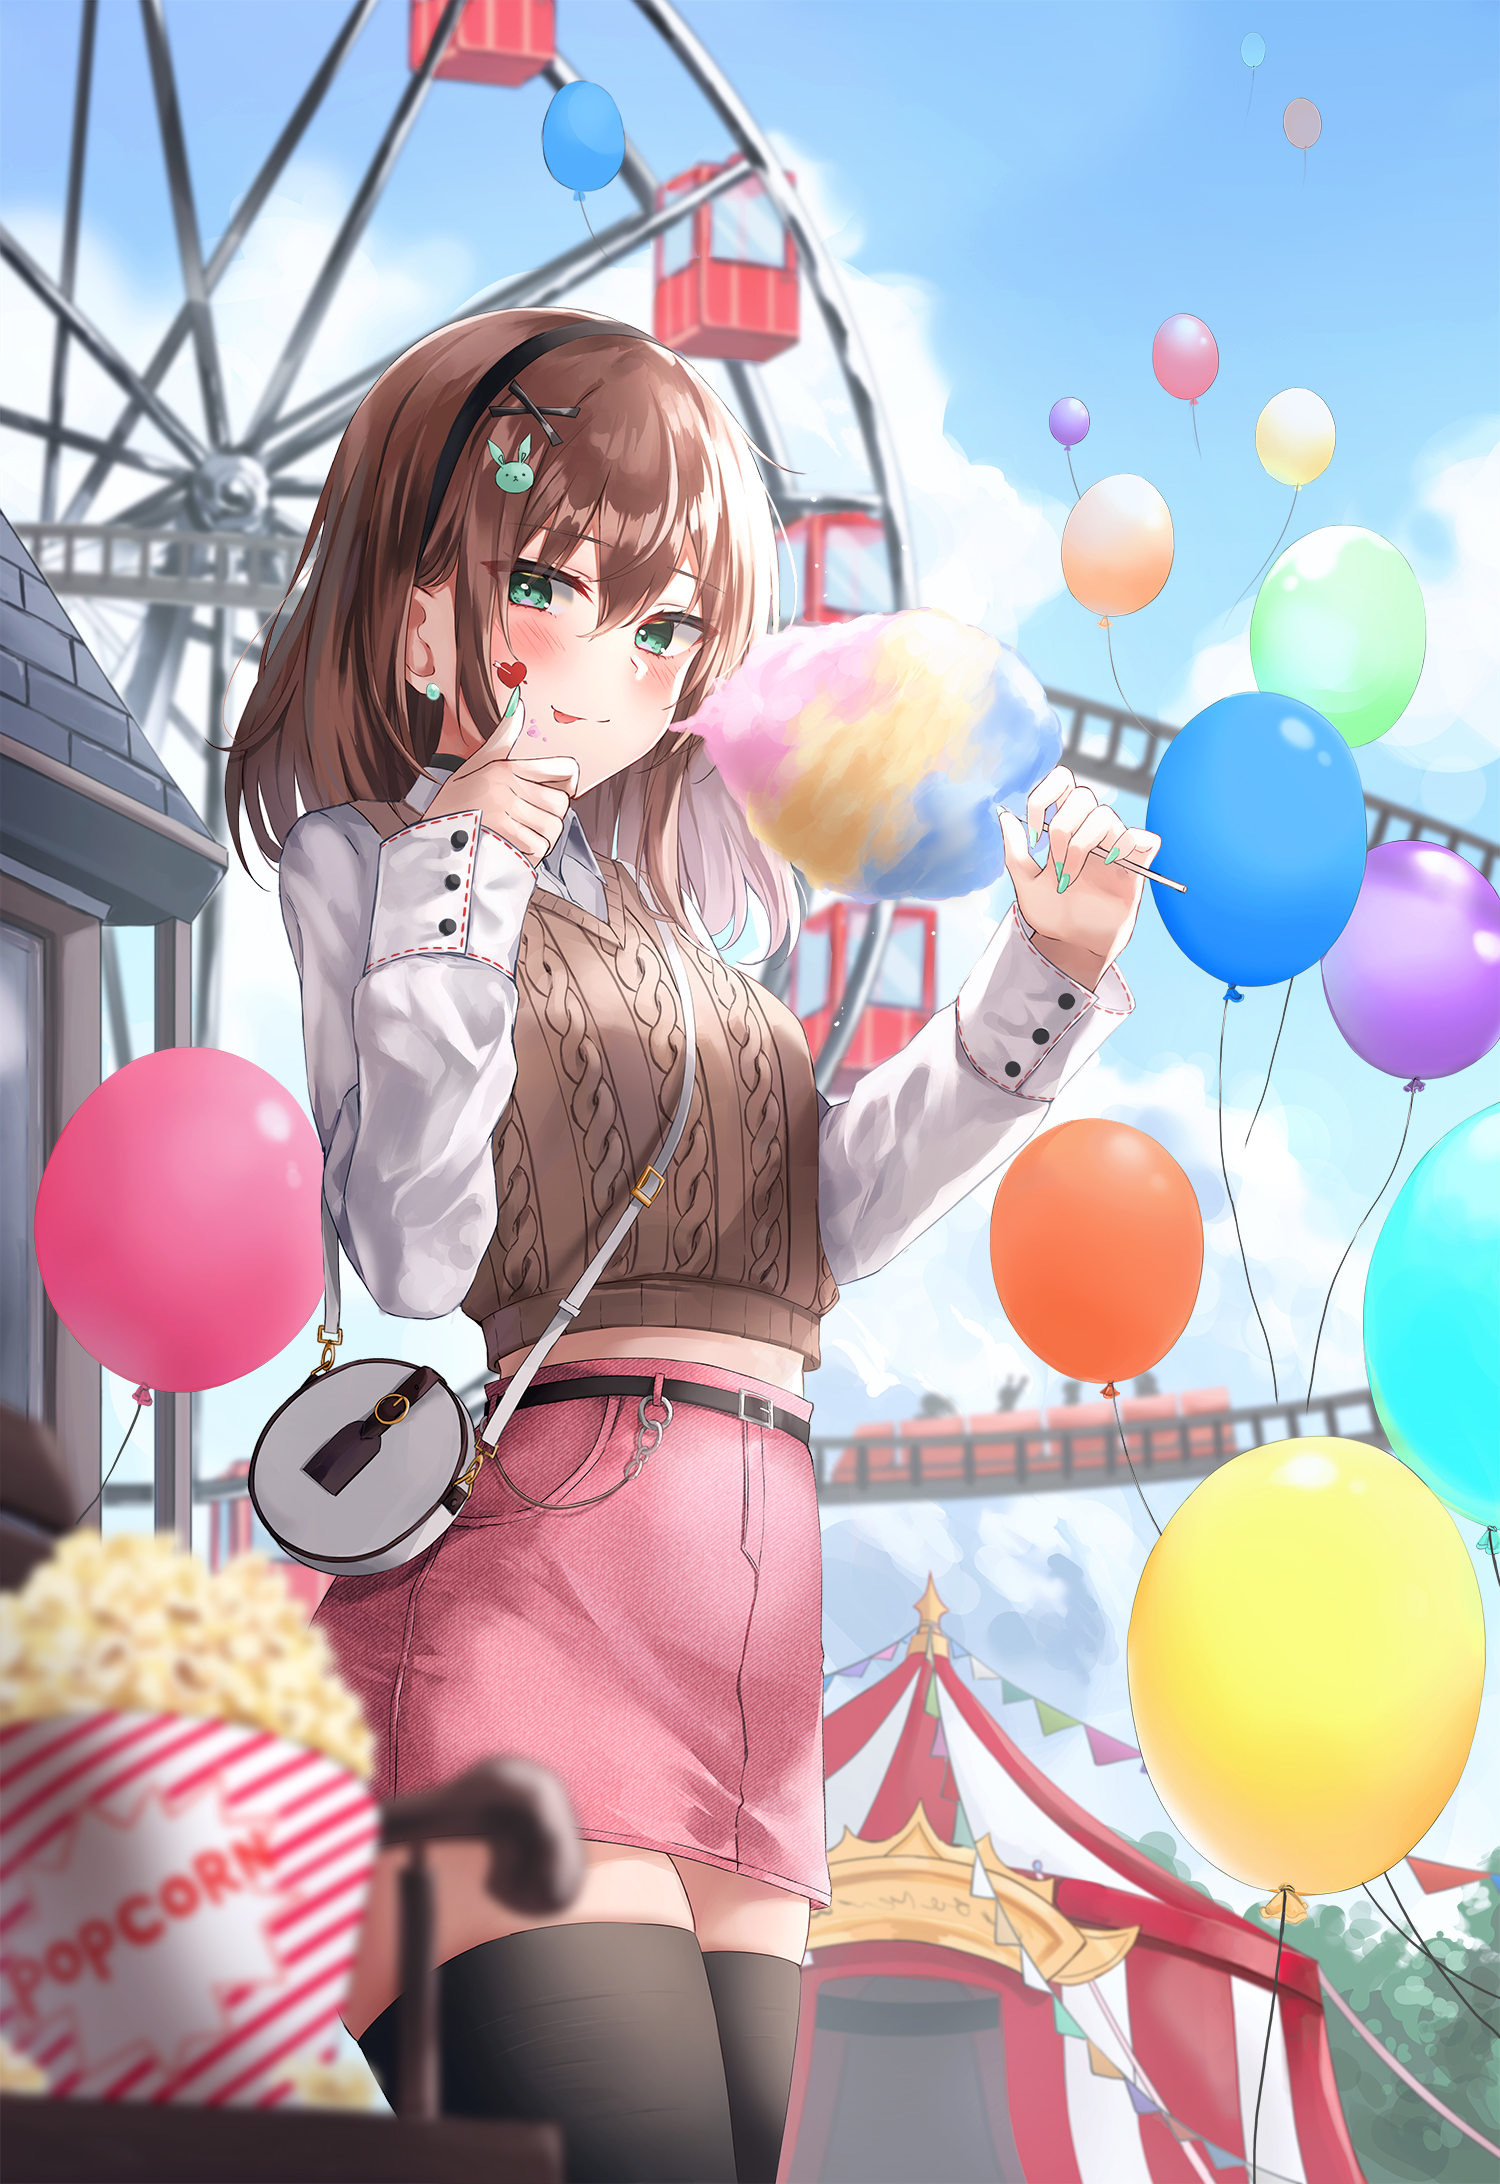 Anime 1500x2184 anime anime girls portrait display balloon cotton candy sweets popcorn tongue out blushing ferris wheel